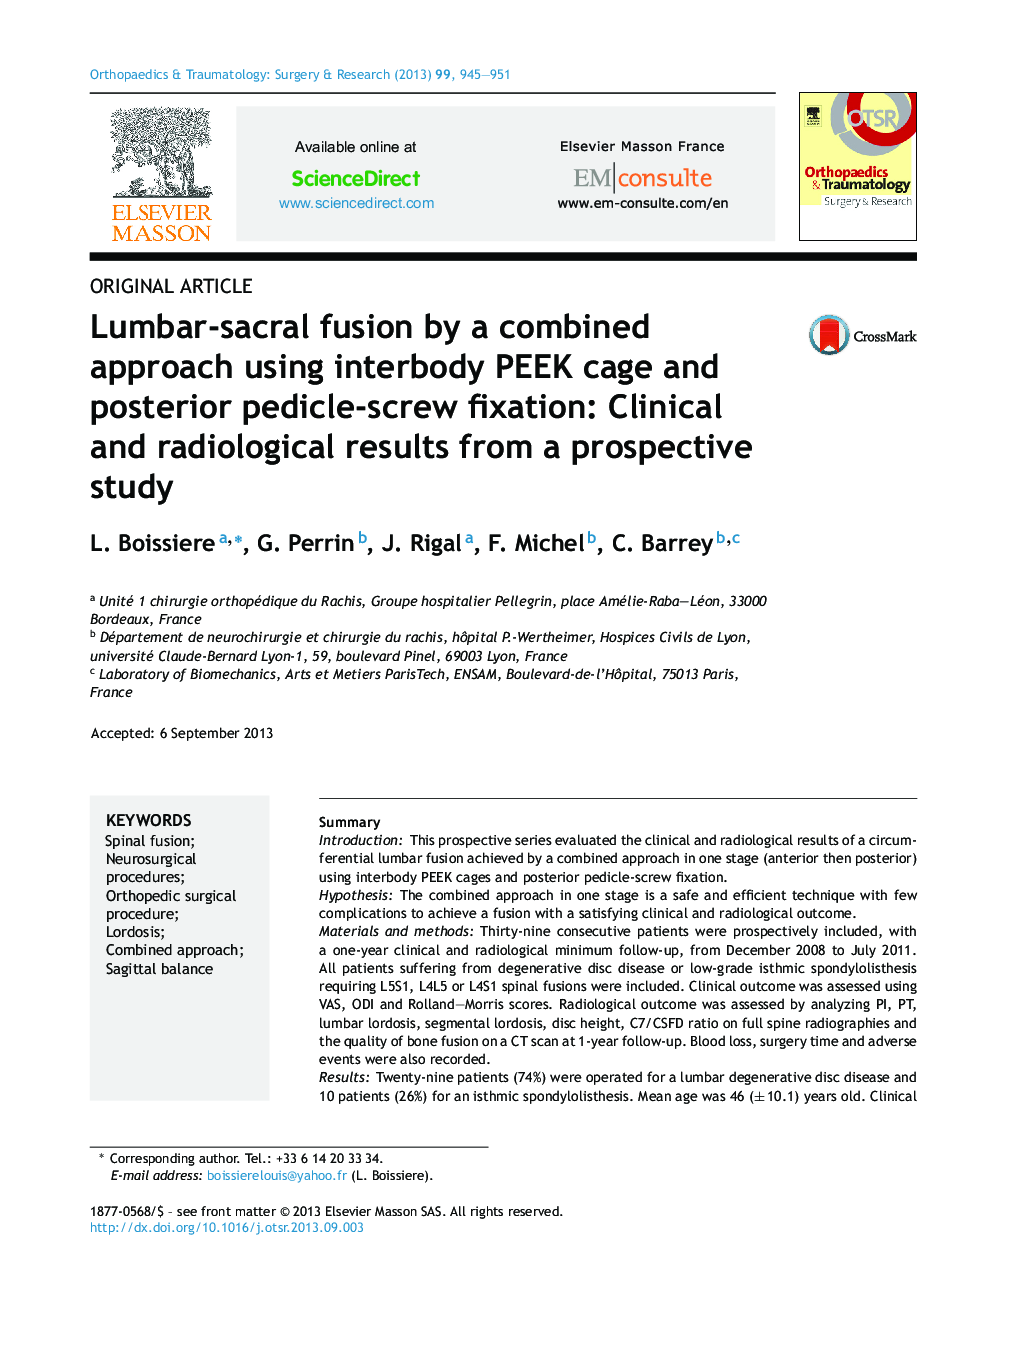 Lumbar-sacral fusion by a combined approach using interbody PEEK cage and posterior pedicle-screw fixation: Clinical and radiological results from a prospective study